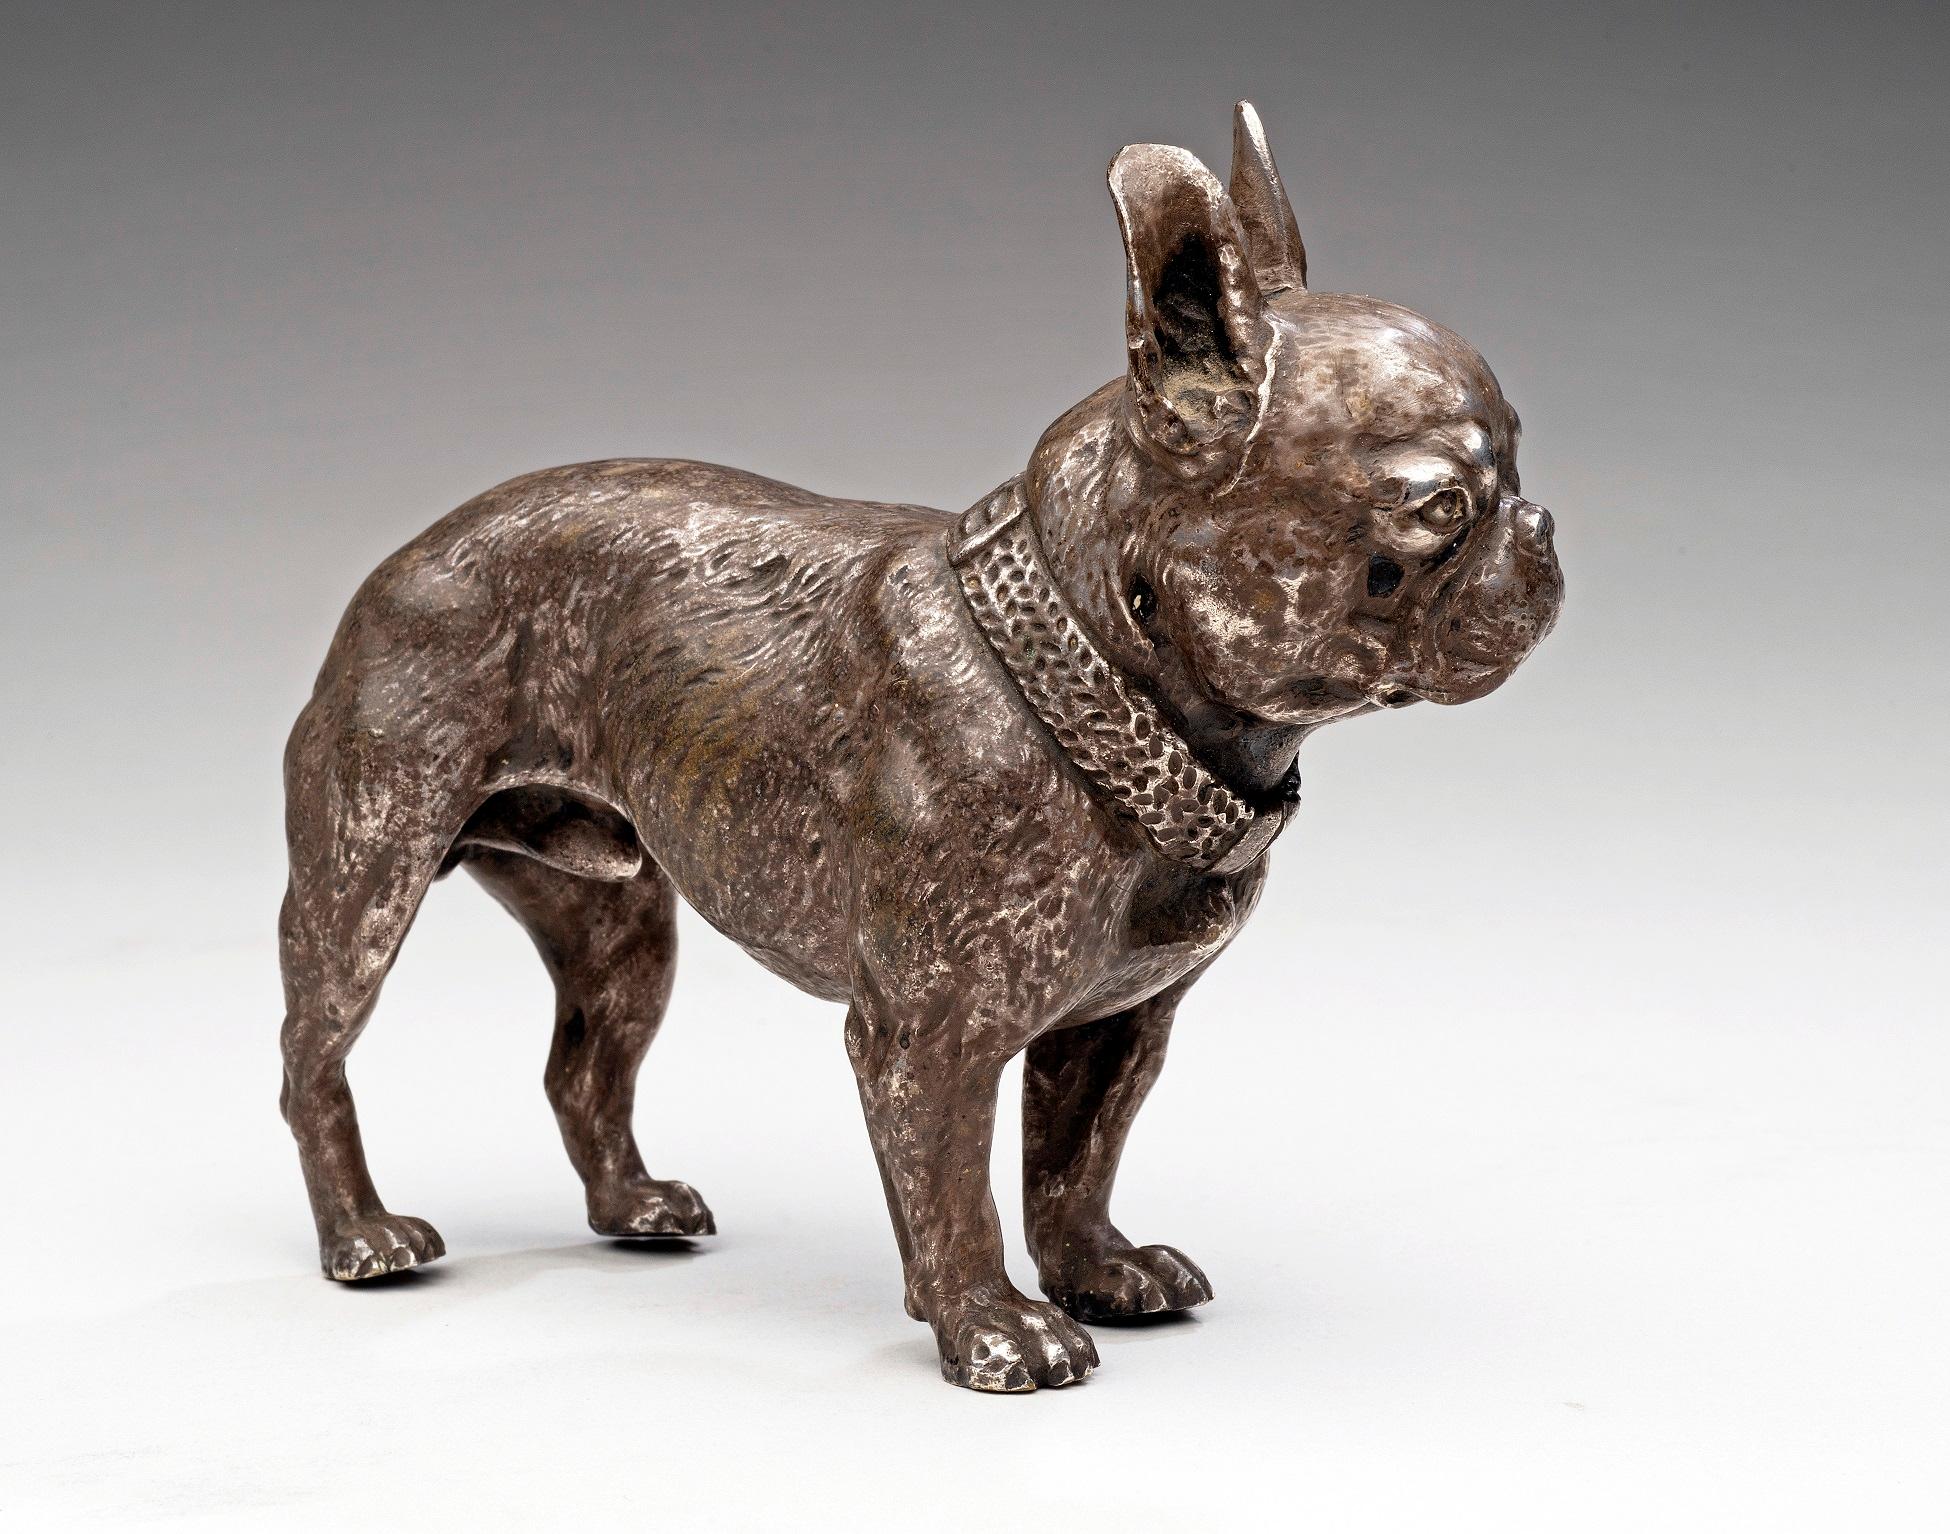 Dog Portrait of a Silvered Bronze French Bulldog circa 1880s-1890s - Realist Sculpture by Unknown